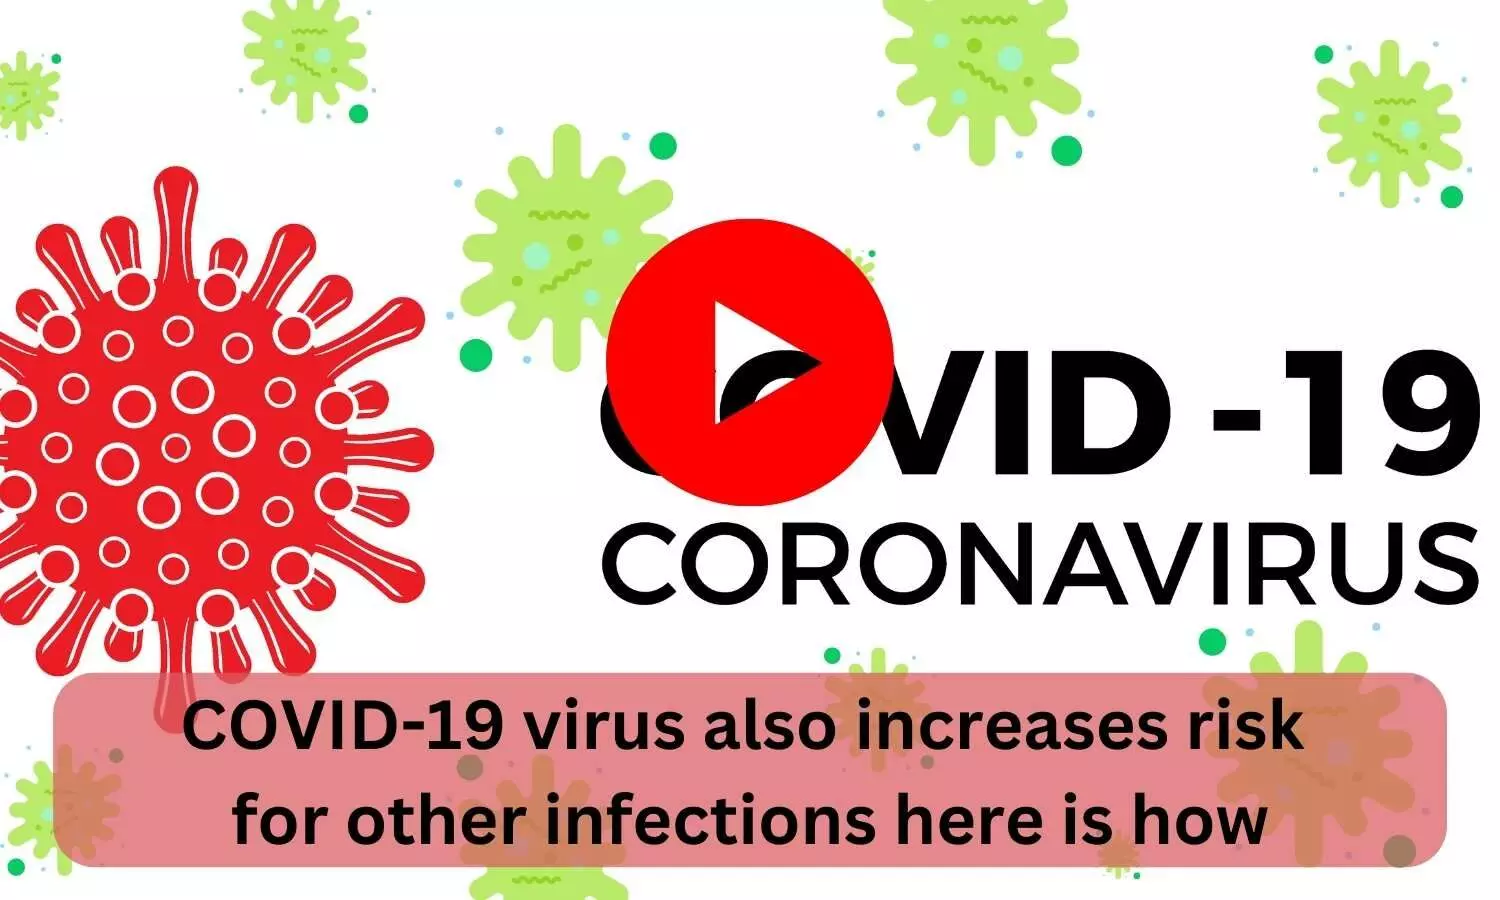 COVID-19 virus also increases risk for other infections and here is how